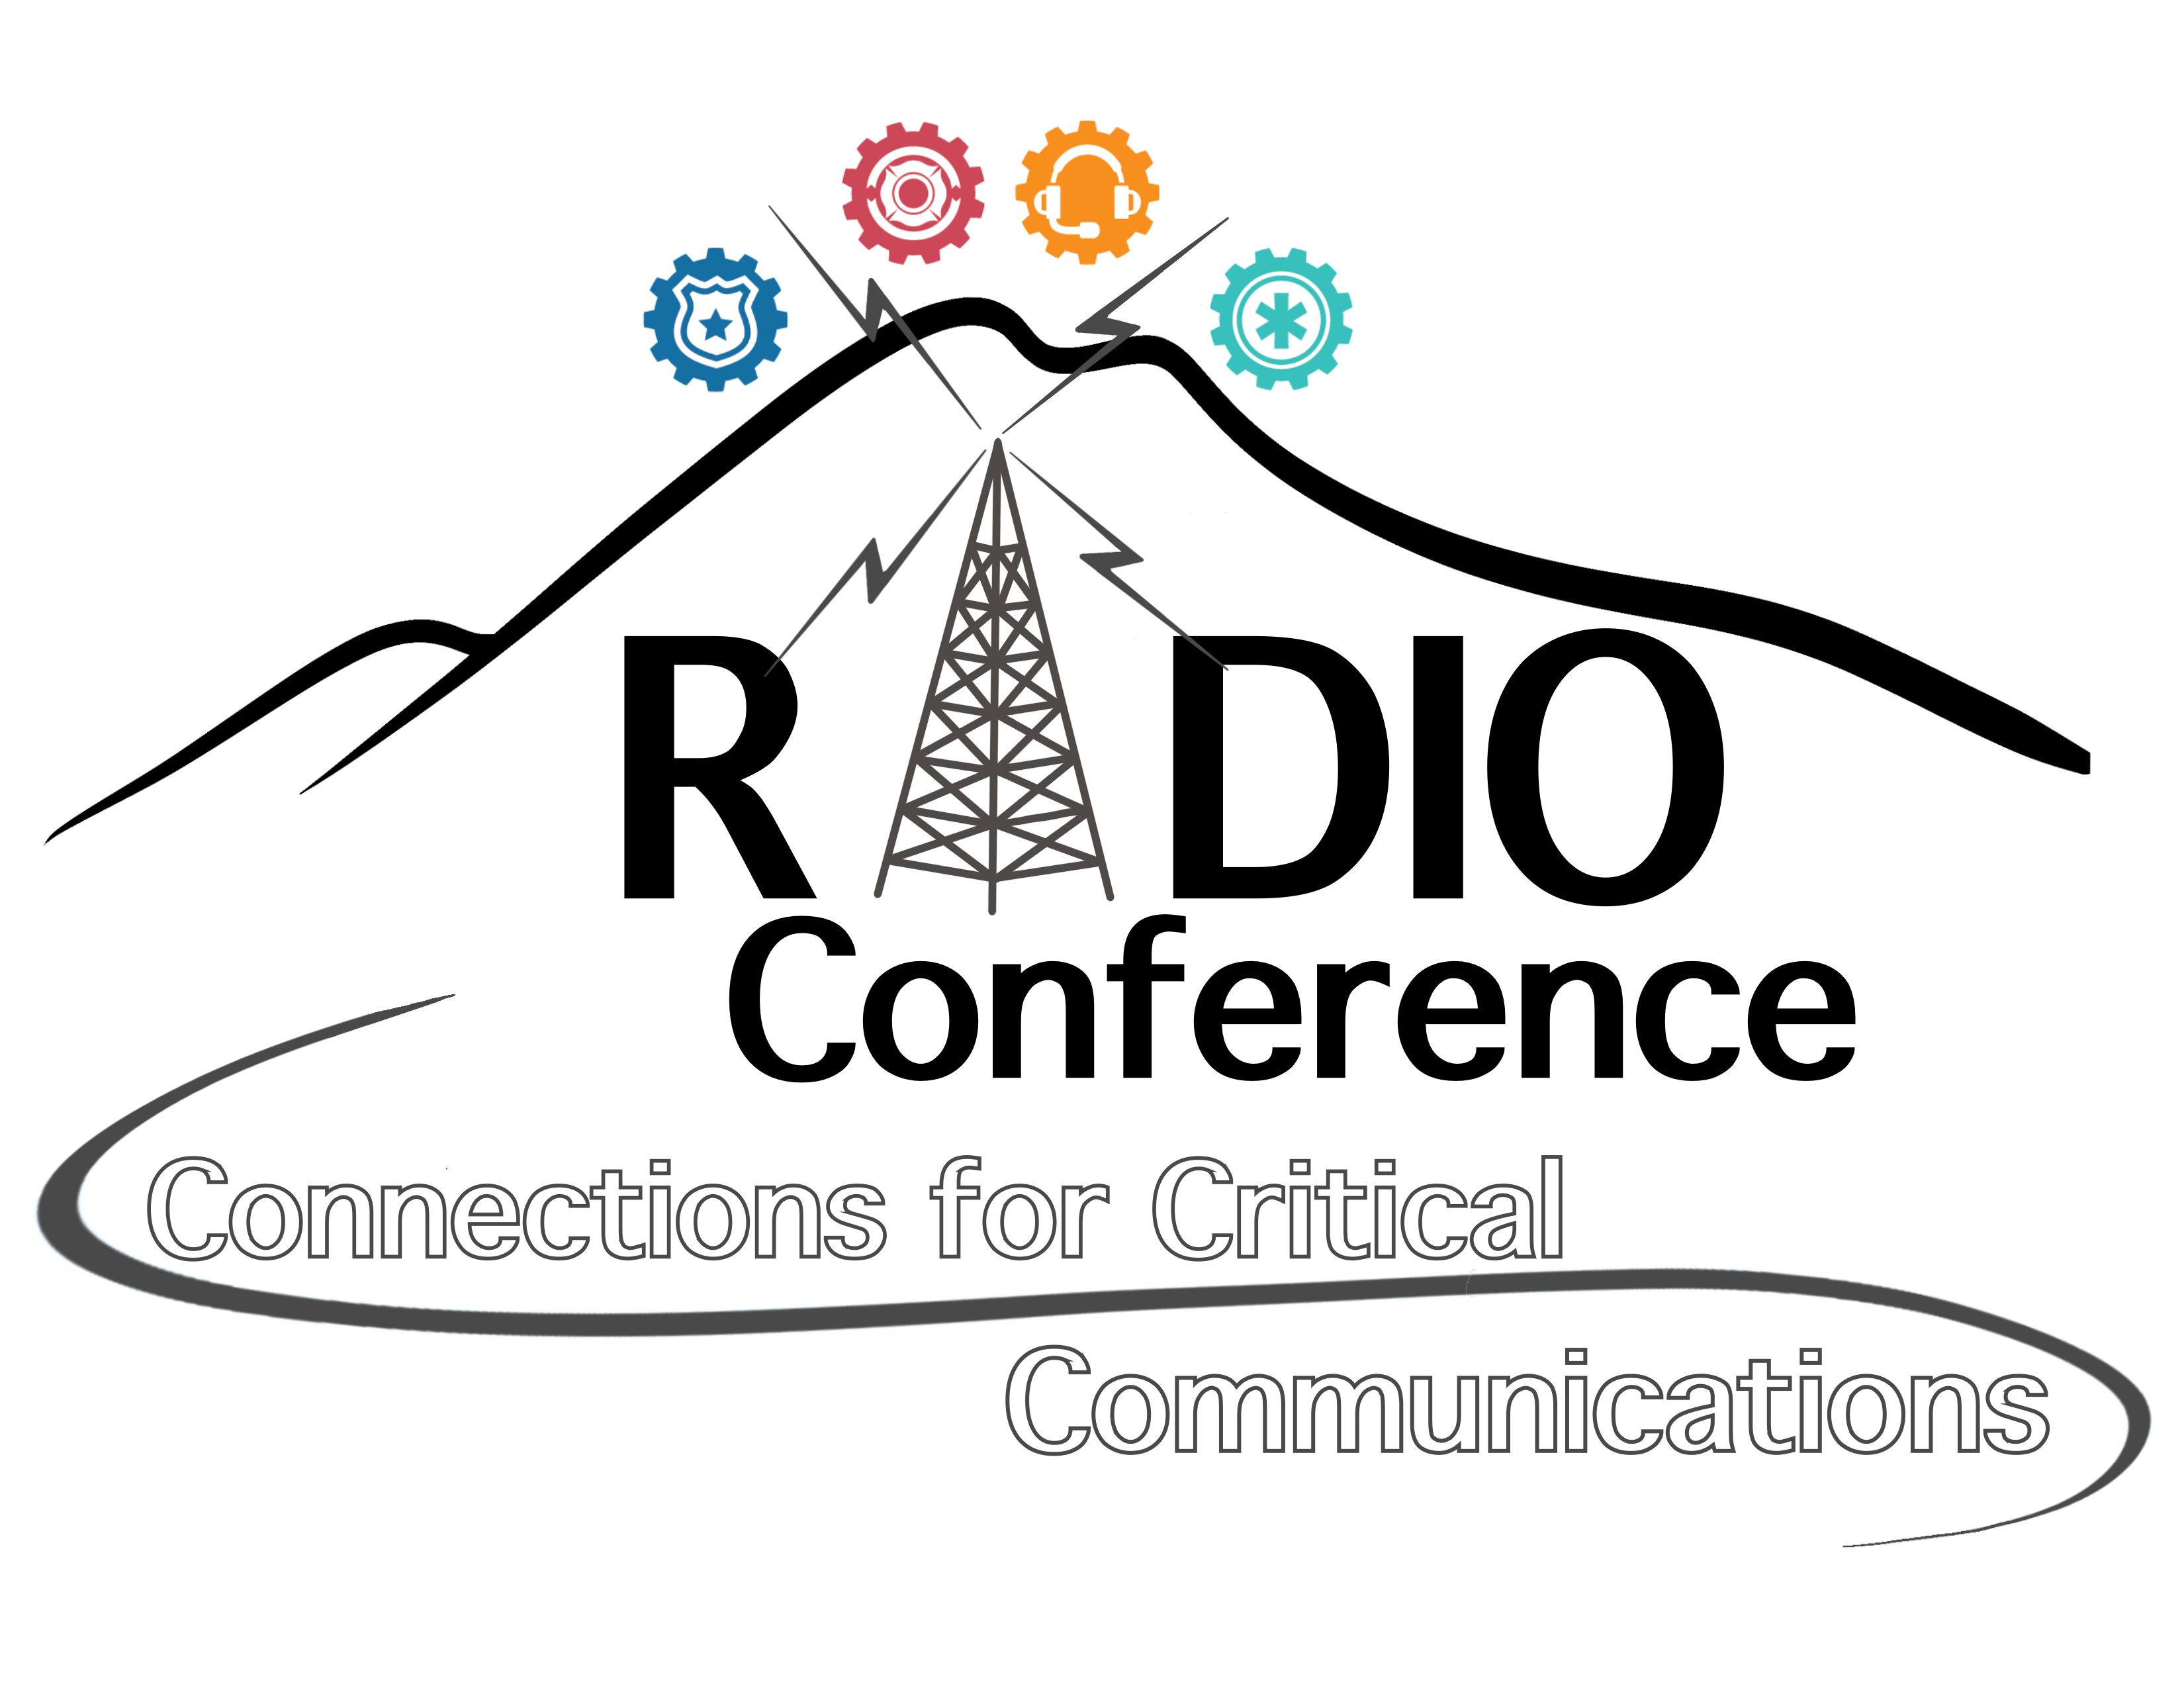 Radio Conference Connections for Critical Communications